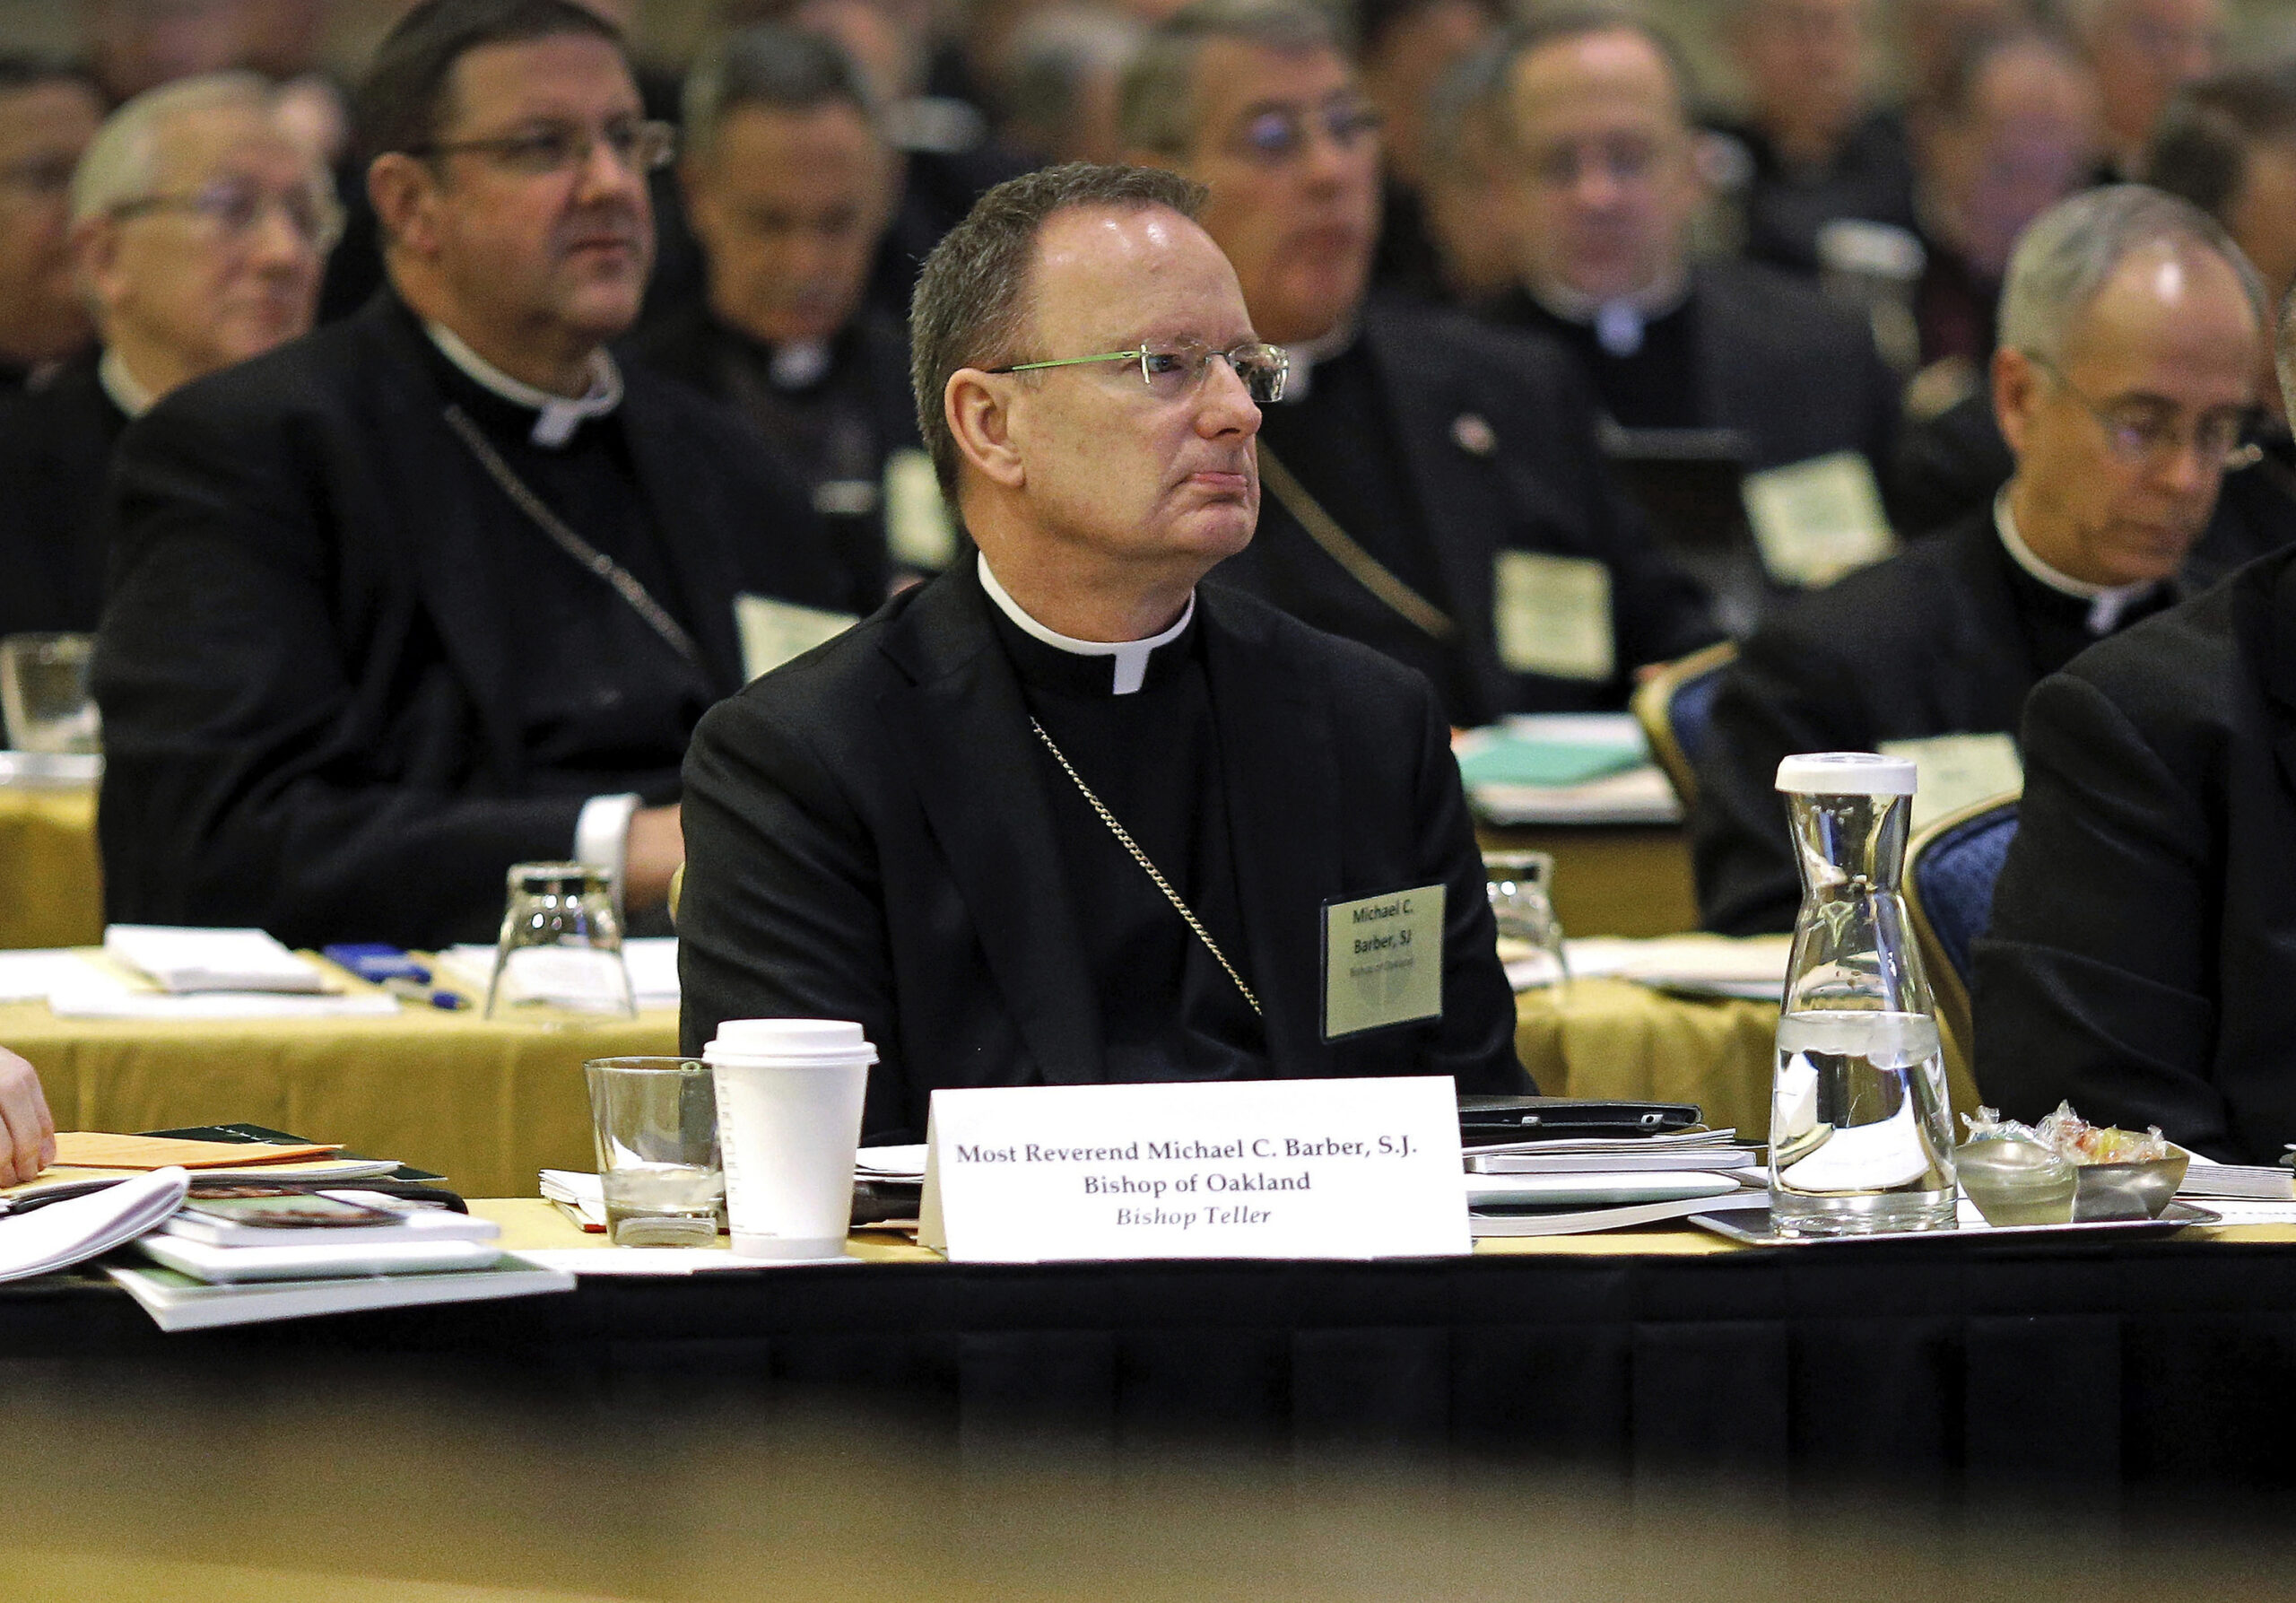 FILE - Roman Catholic Diocese of Oakland Bishop Michael Barber, center, listens to a presentation alongside fellow bishops at the United States Conference of Catholic Bishops' annual fall meeting in Baltimore, Nov. 12, 2013. On Monday, May 8, 2023, the Roman Catholic Diocese of Oakland filed for bankruptcy due to hundreds of new child sex abuse claims, becoming the second diocese in California to do so. The San Francisco Bay Area diocese faces more than 330 lawsuits brought under a California law allowing claims that would have otherwise expired, Barber said in a letter posted to the diocese's website. (AP Photo/Patrick Semansky, File)